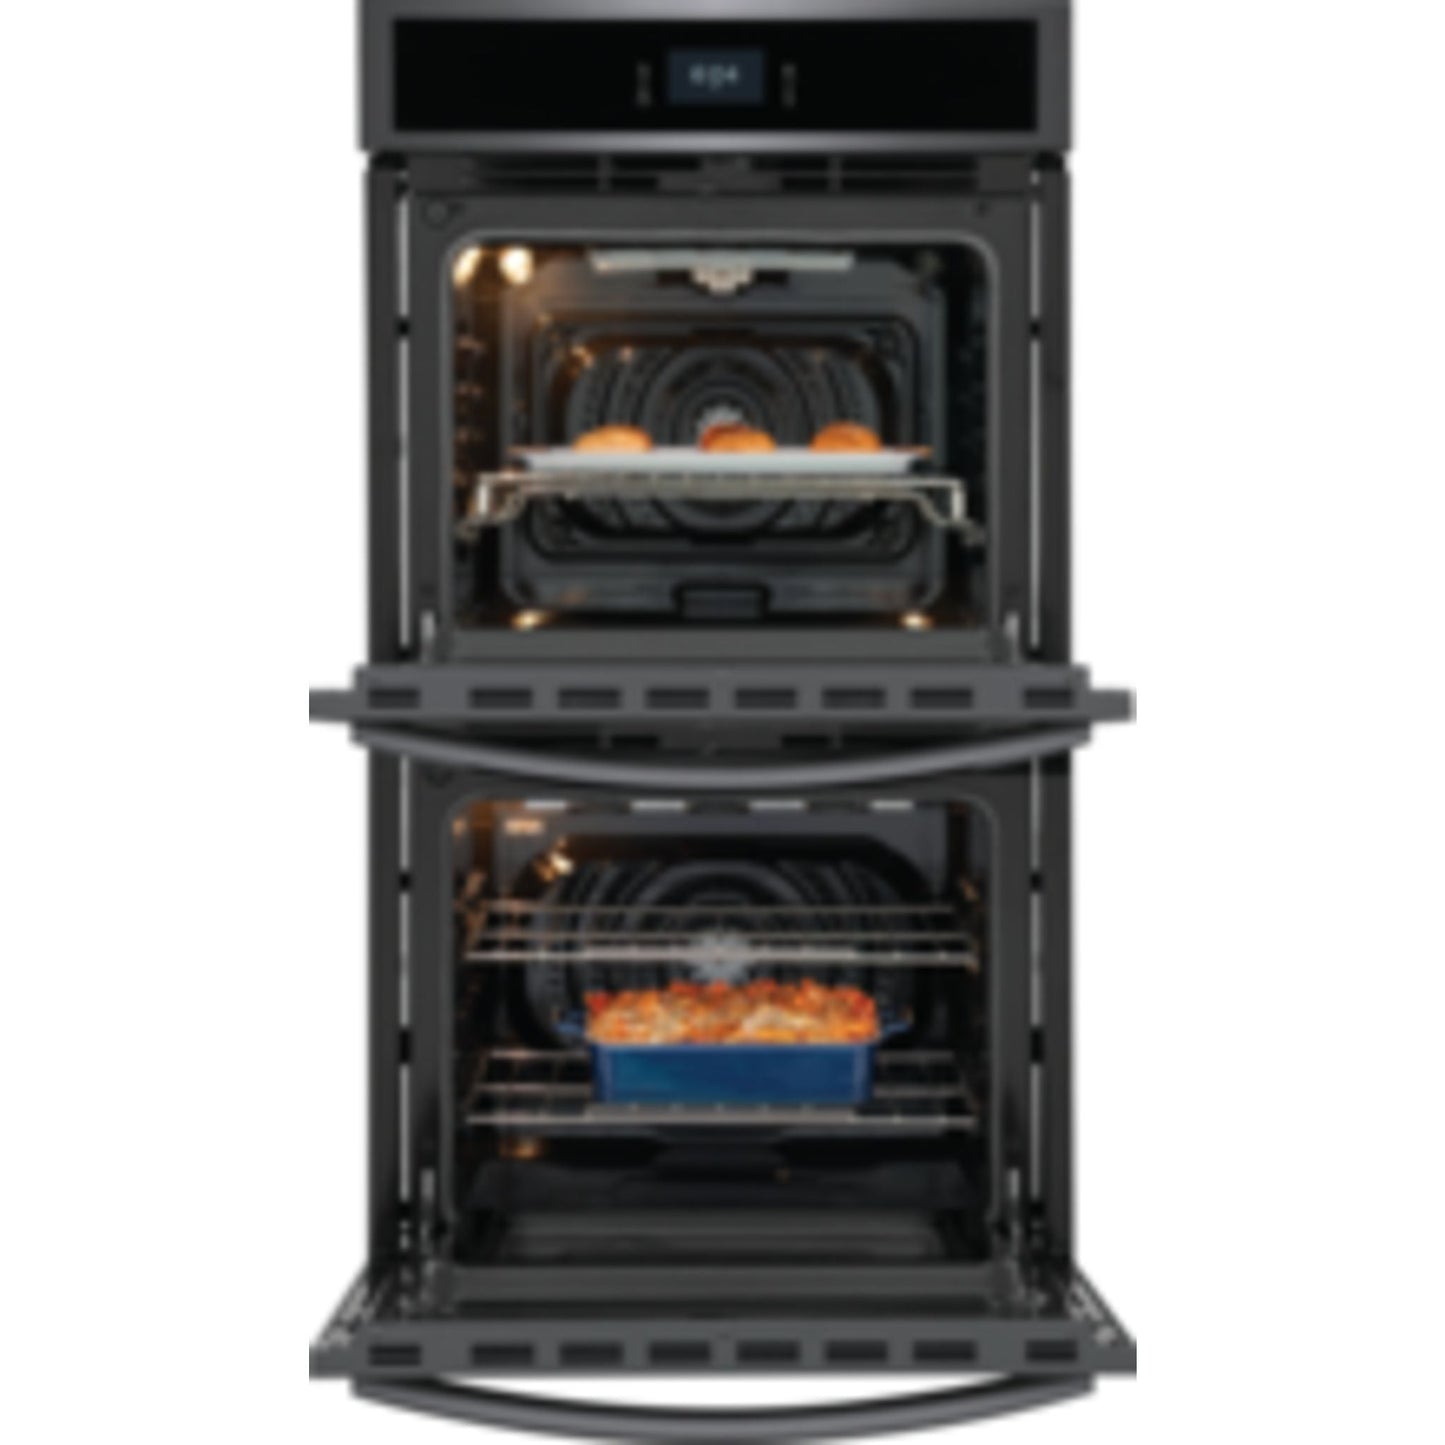 Frigidaire Gallery 27” Double Wall Oven (GCWD2767AD) - Black Stainless, SmudgeProof